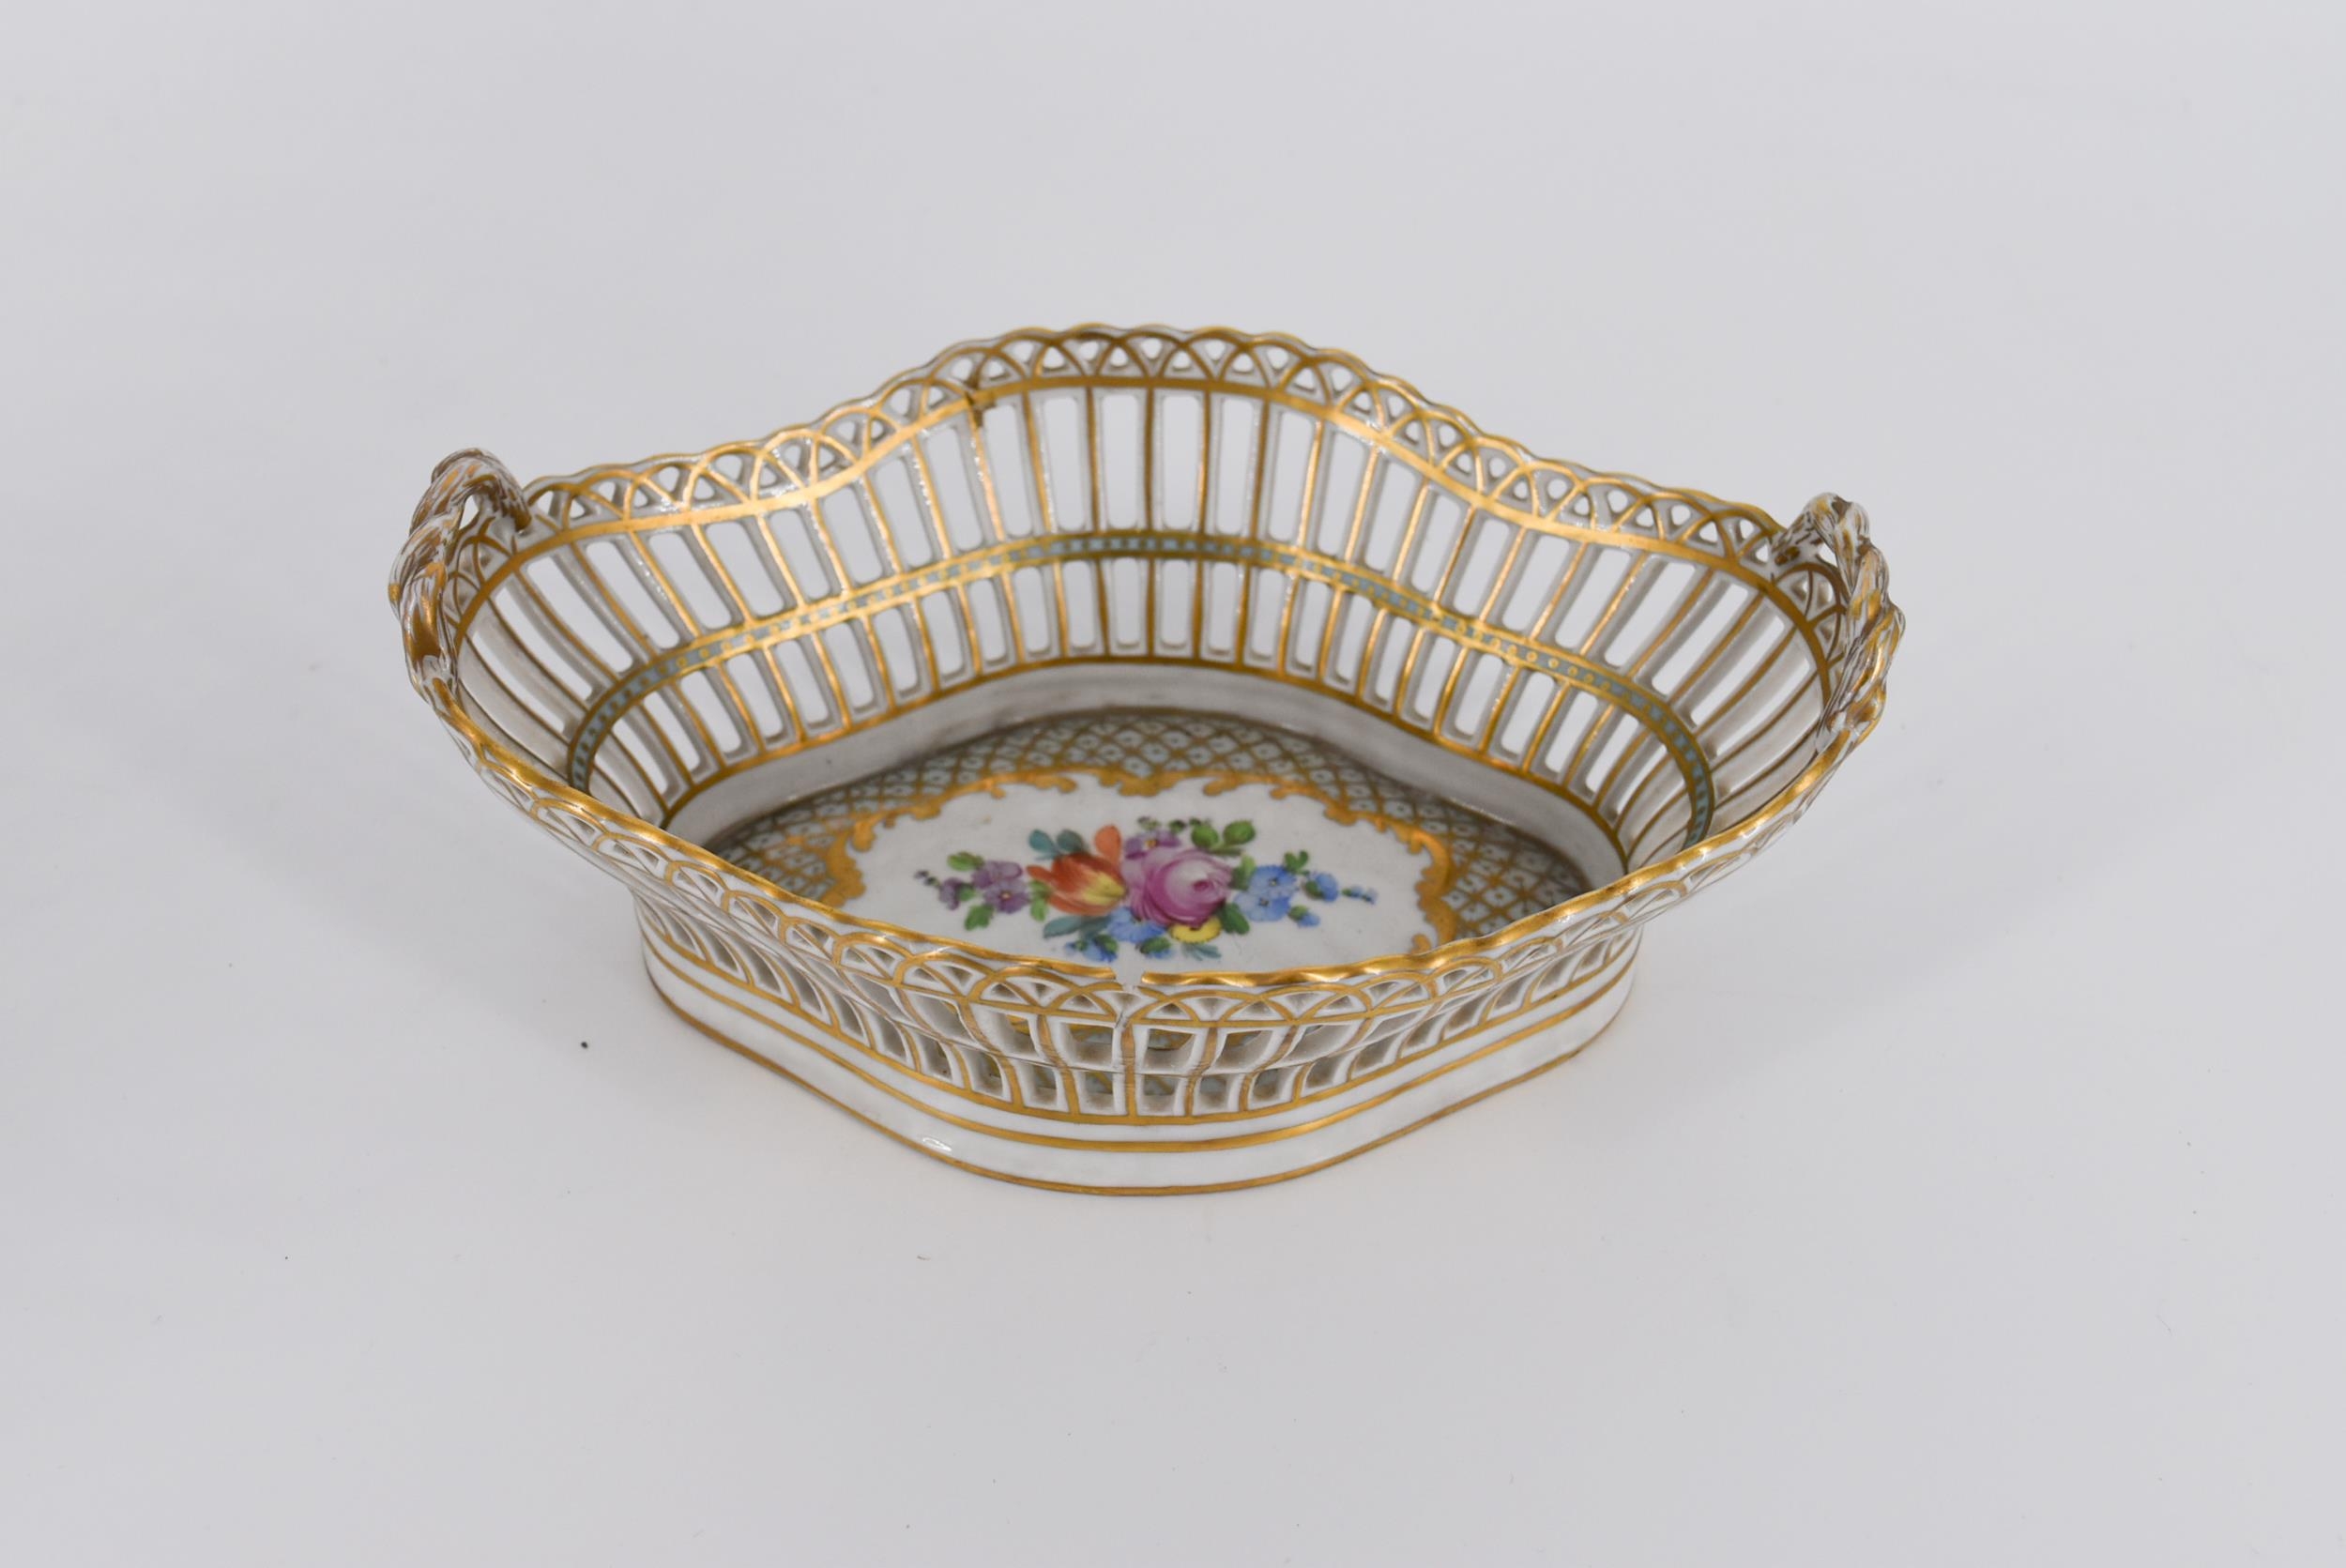 A 20th century Dresden porcelain comport, with a pierced and flared rim, encrusted with flowers, - Image 6 of 8